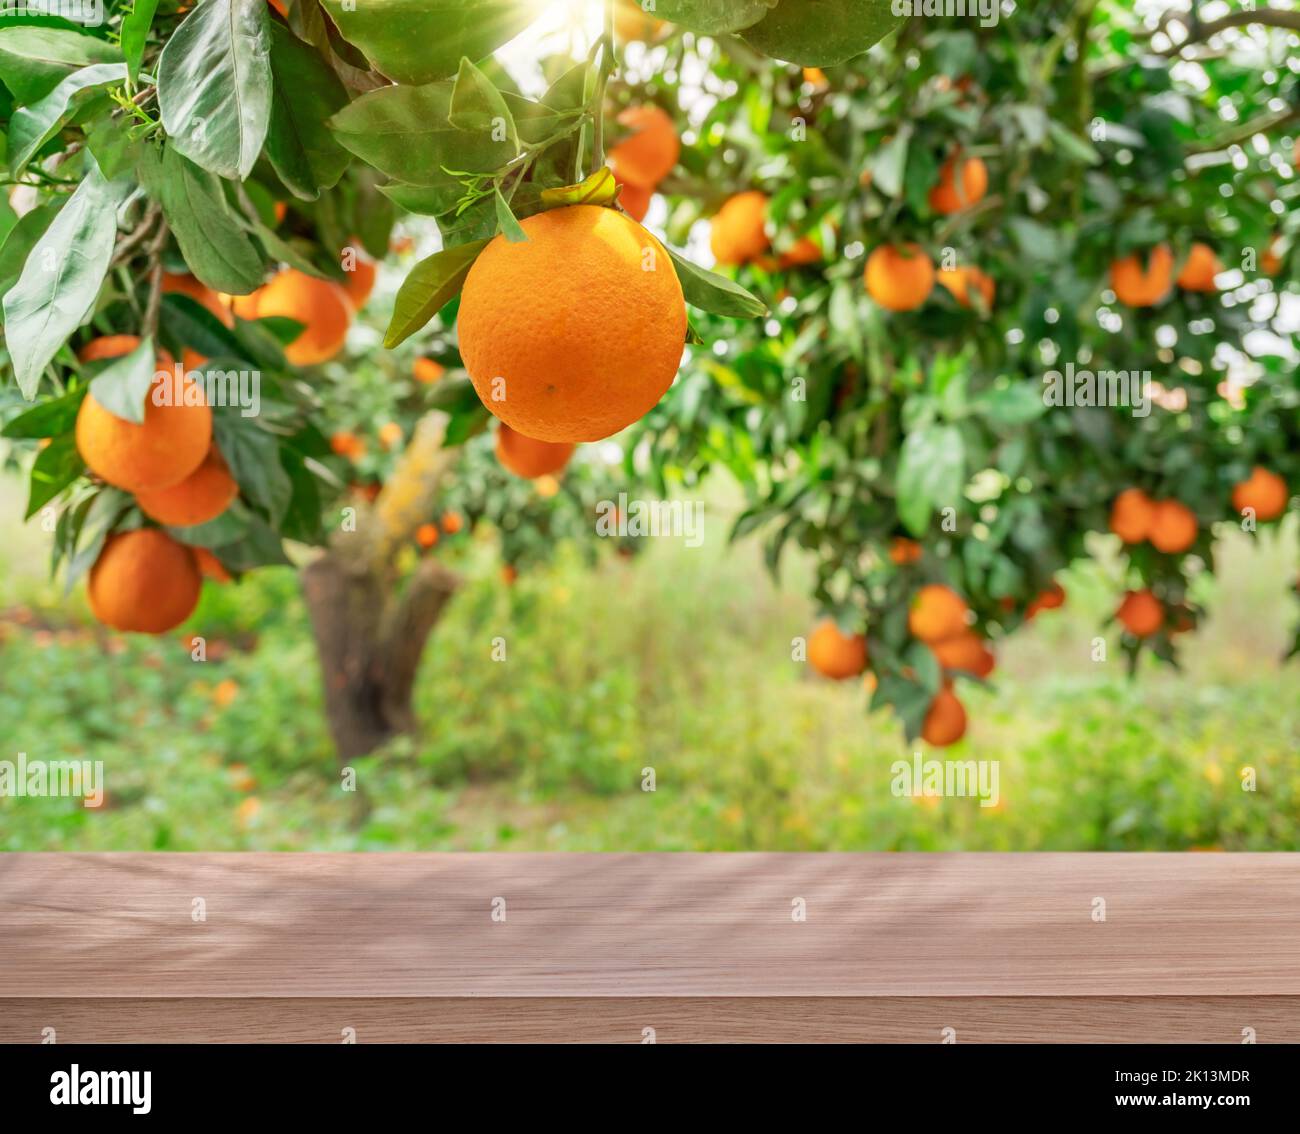 Wooden table top ander orange trees covered with orange fruits. Blurred sunny orchard garden at the background. Stock Photo